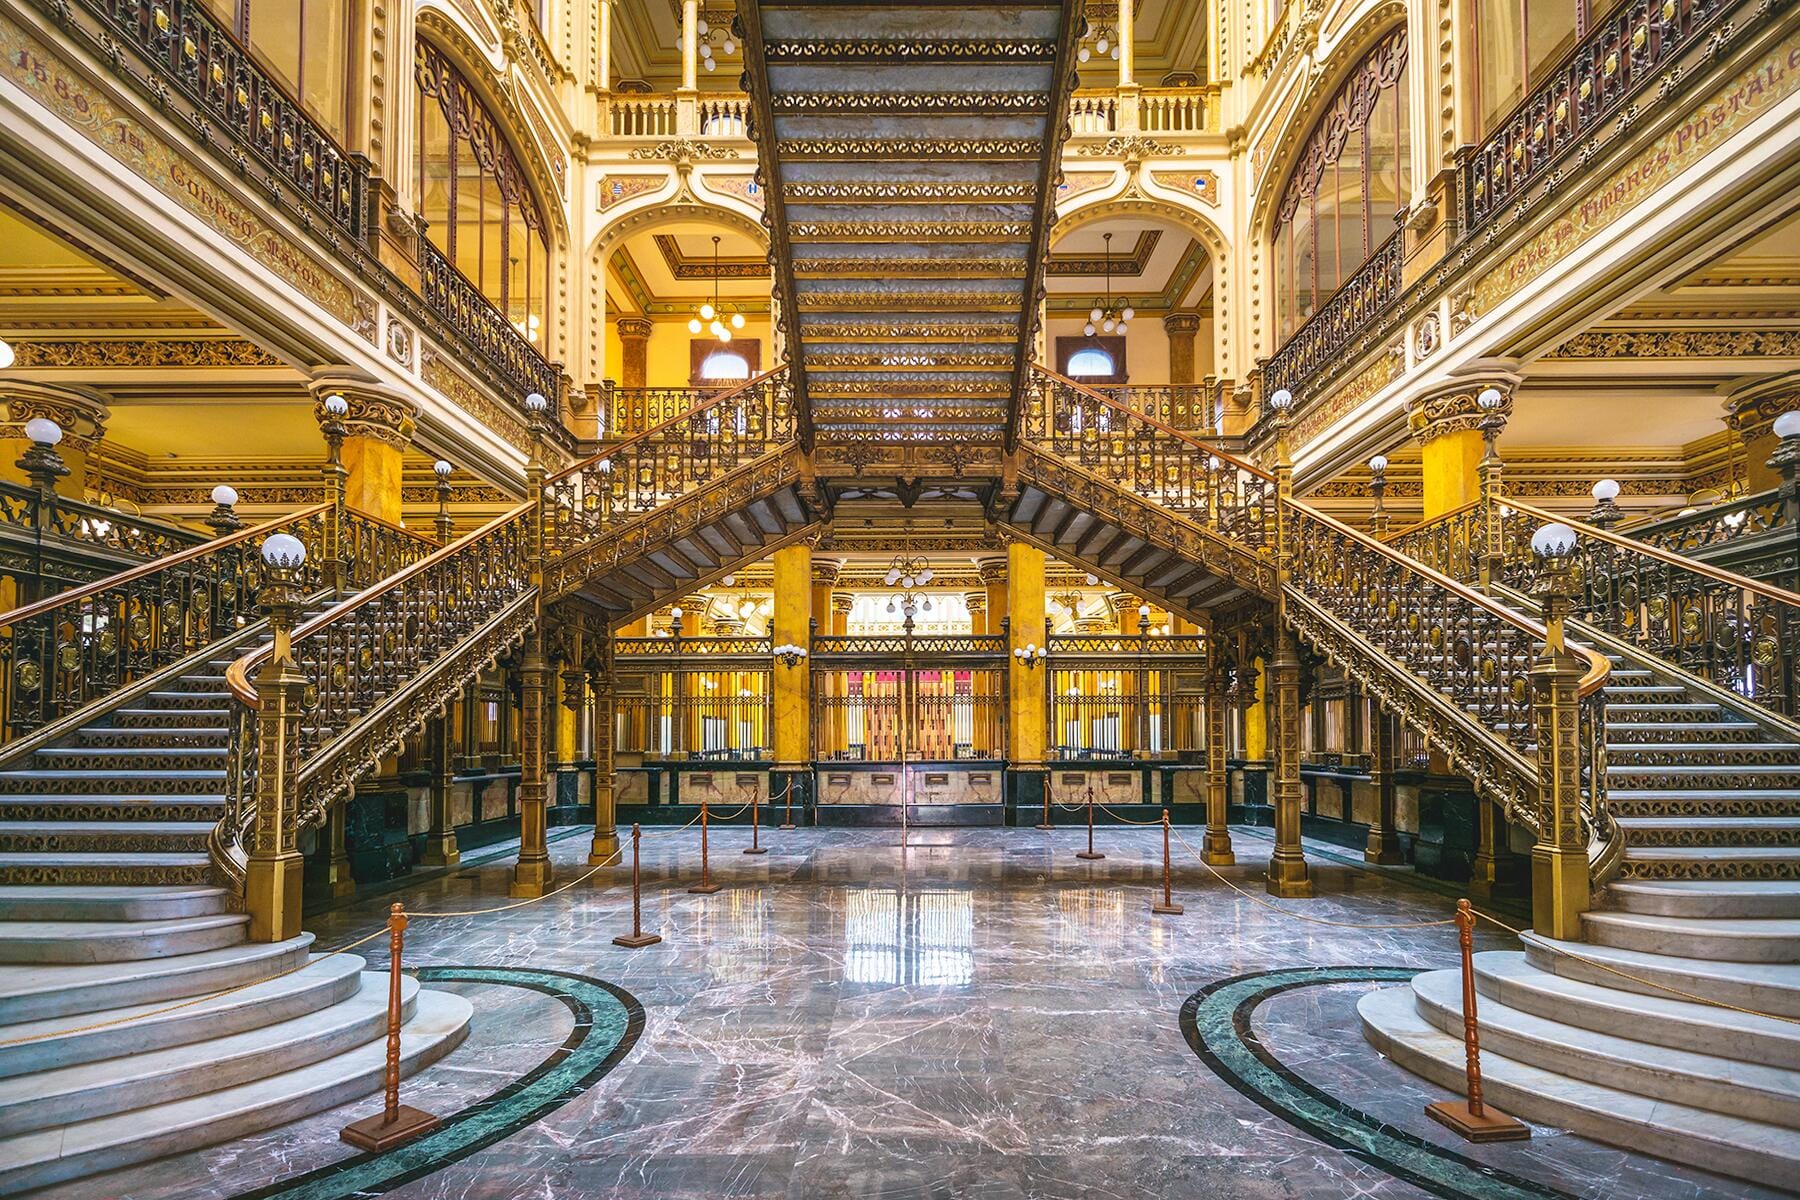 <a href='https://www.fodors.com/world/mexico-and-central-america/mexico/mexico-city/experiences/news/photos/20-ultimate-things-to-do-in-mexico-city#'>From &quot;25 Ultimate Things to Do in Mexico City: Palacio Postal&quot;</a>